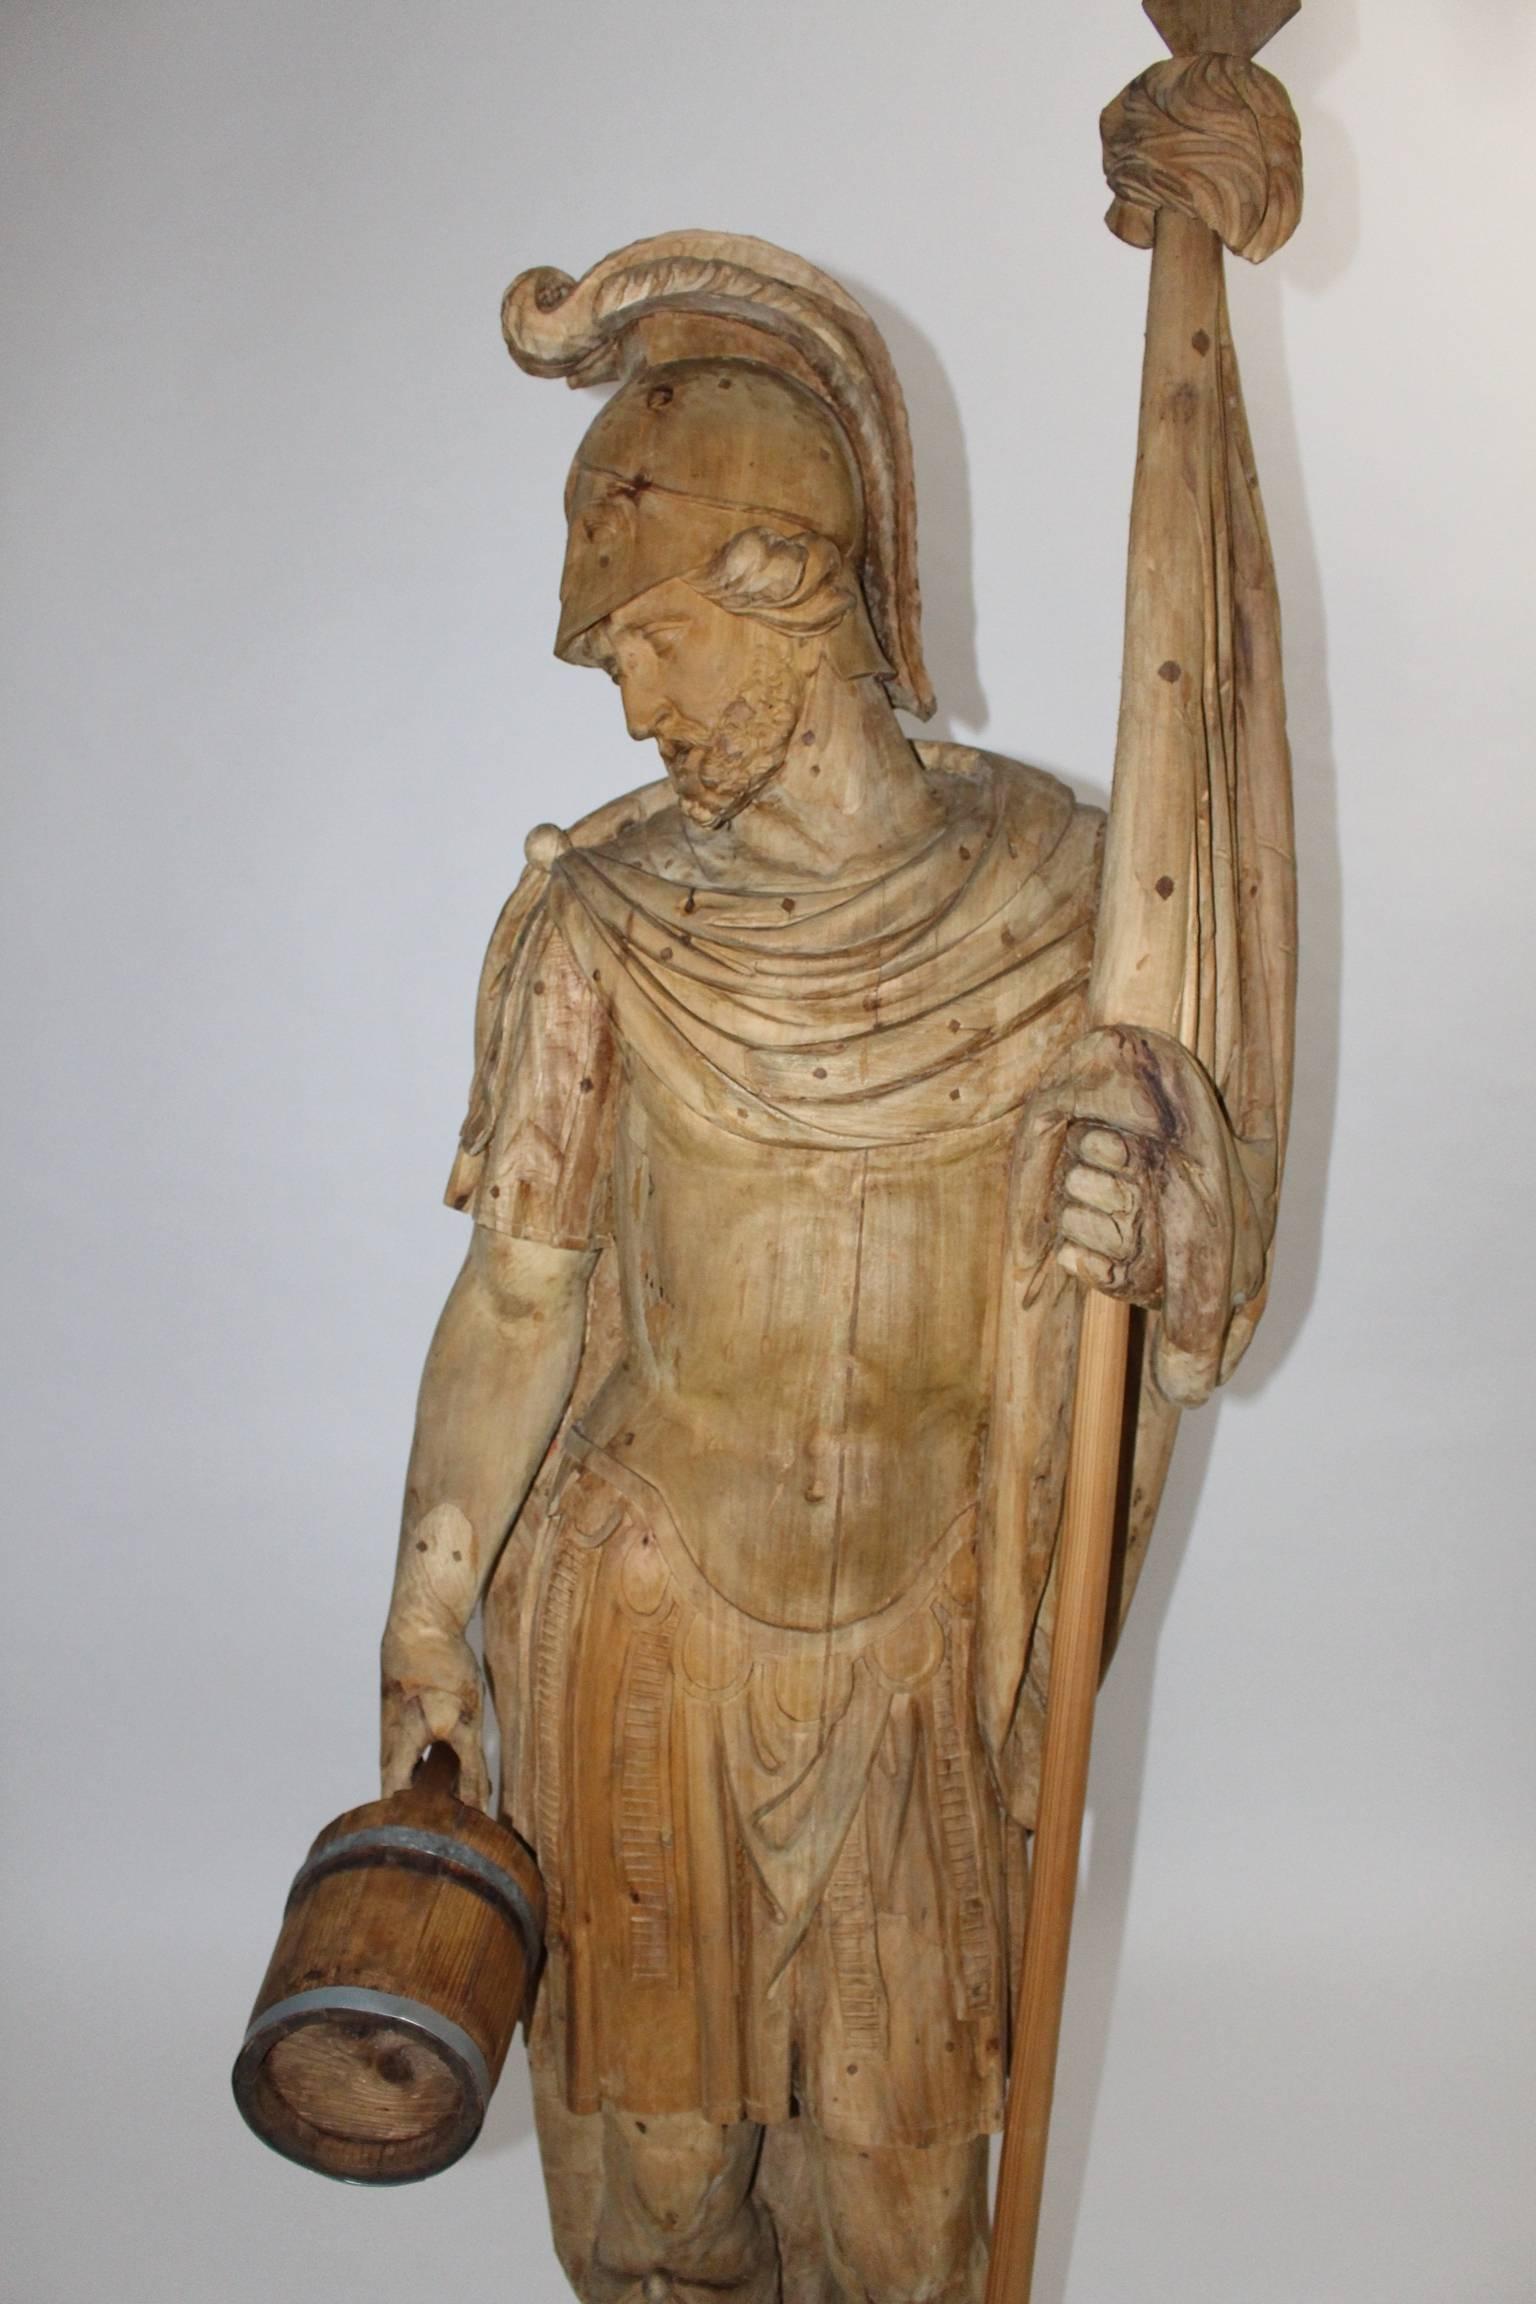 This huge hand-carved figure shows the protector and patron against fire, Saint Florian.
St. Florian is dressed like a roman soldier and his attribute is a water bucket.
The figure was made of hand-carved basswood, spruce and metal rings, which are